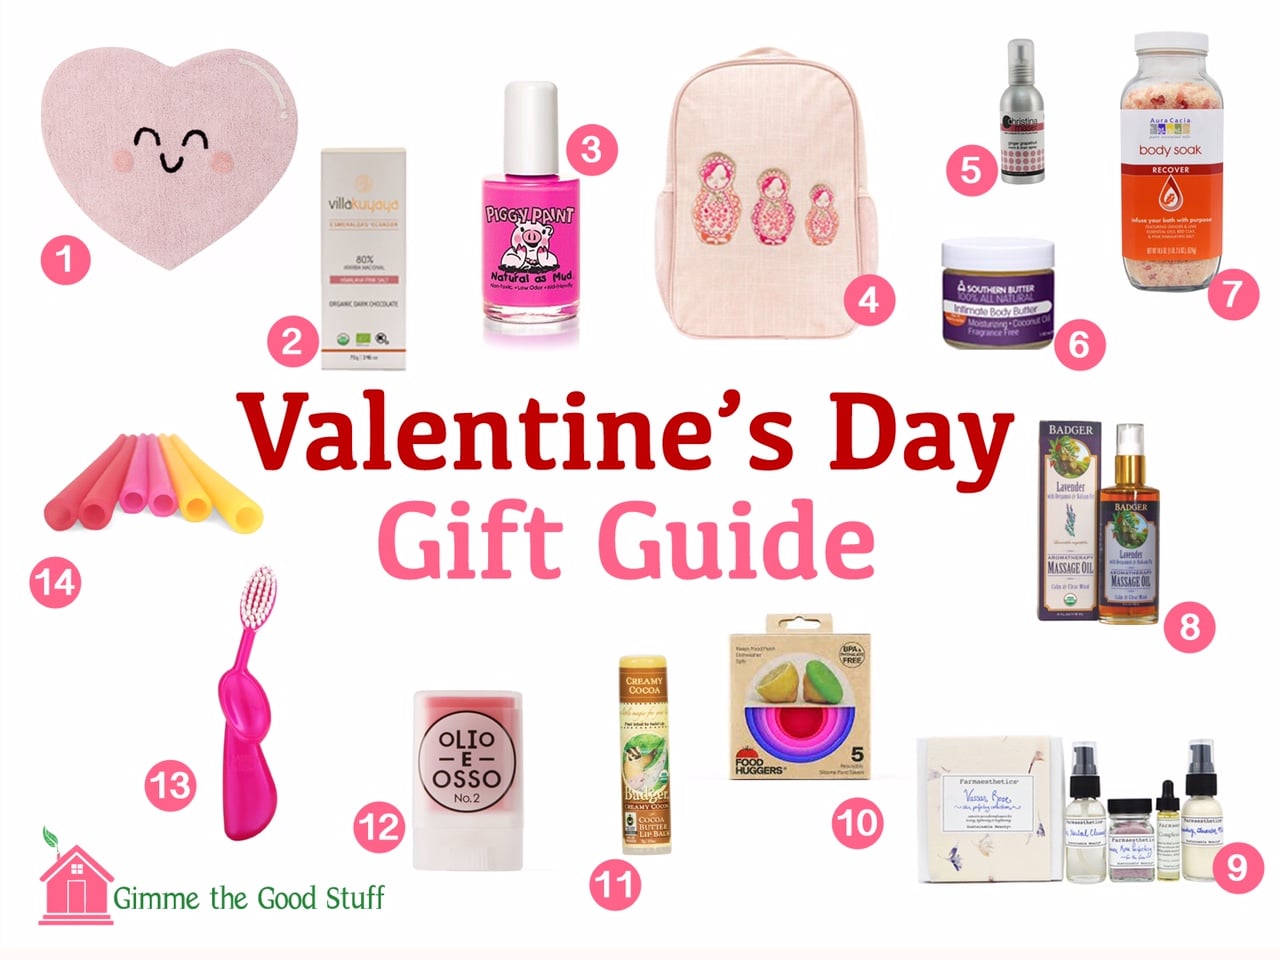 Ideas for a Healthy Valentine’s Day